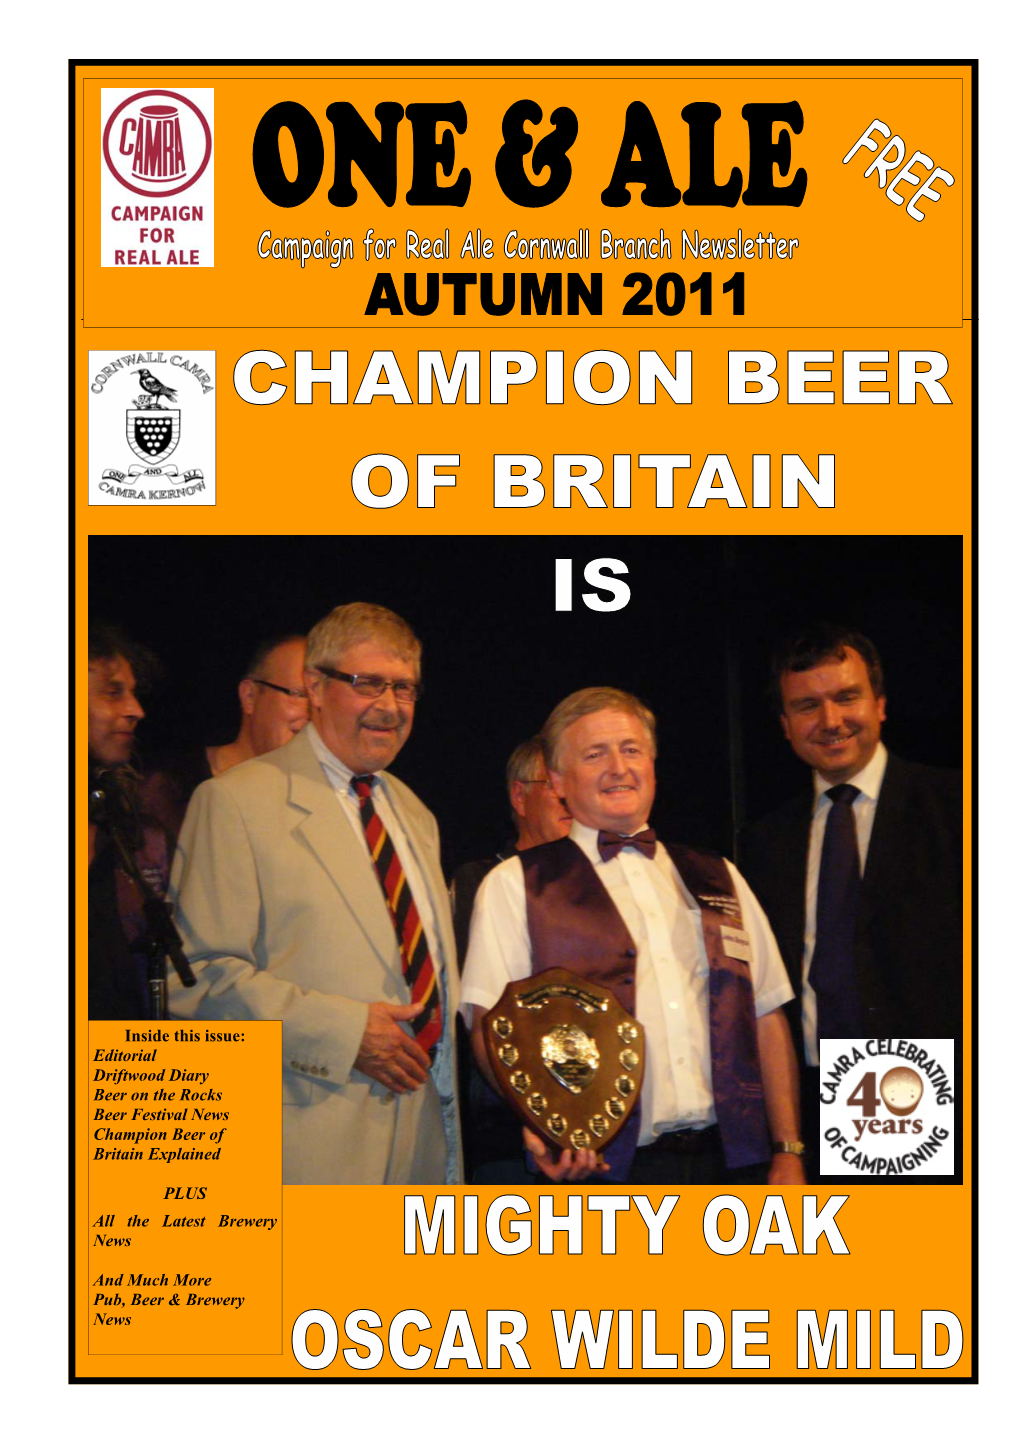 Editorial Driftwood Diary Beer on the Rocks Beer Festival News Champion Beer of Britain Explained